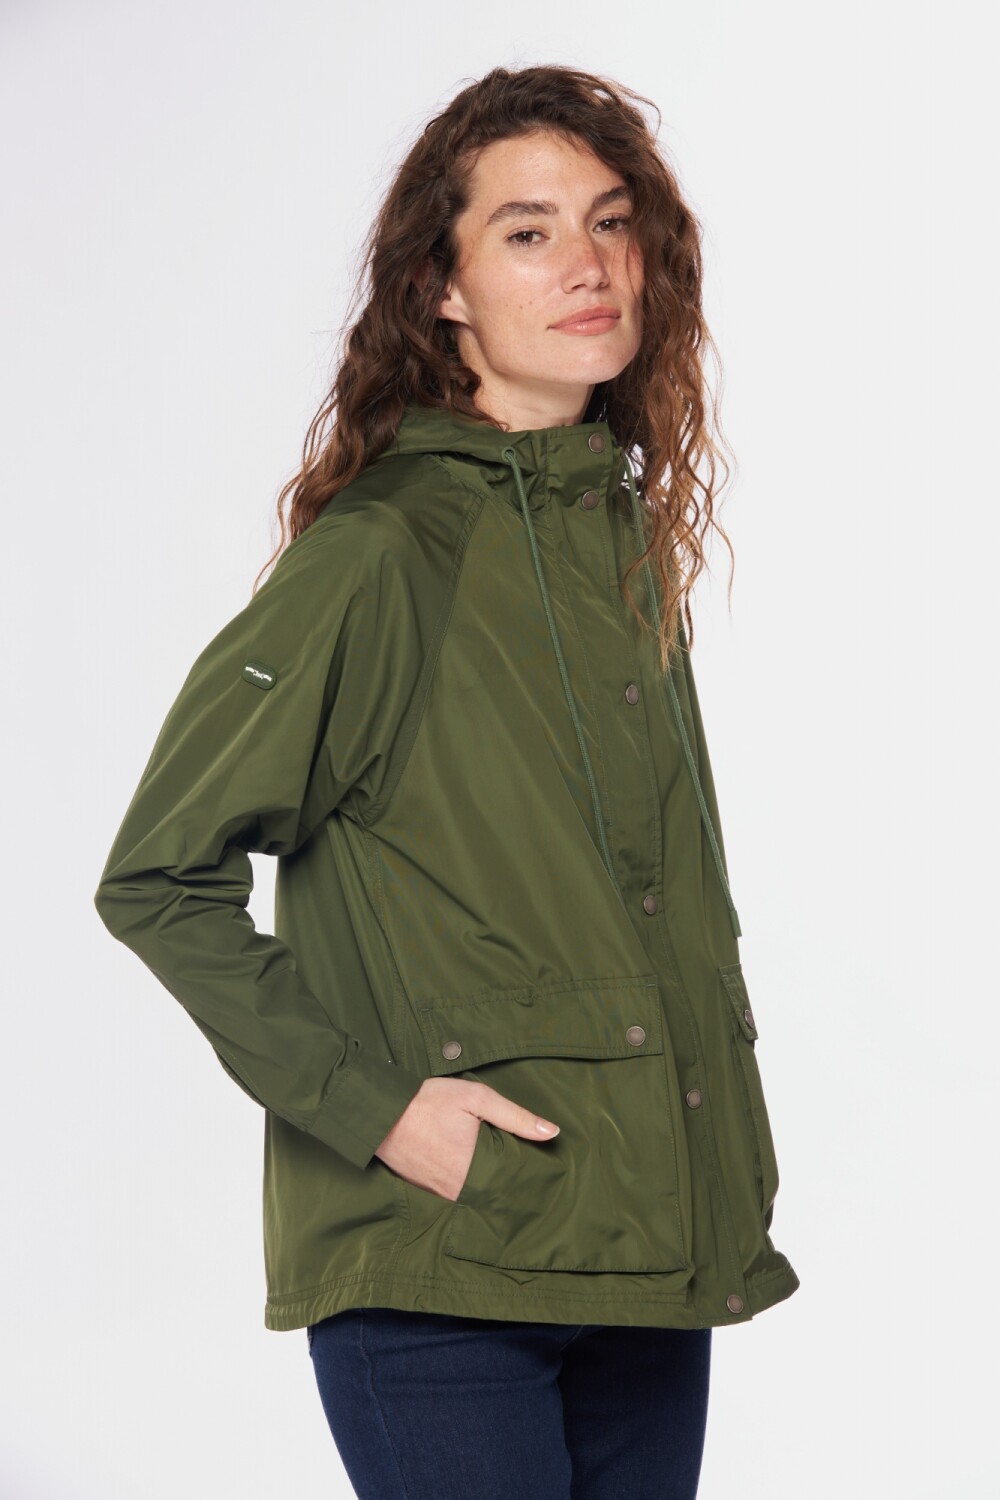 CAMPERA IMPERMEABLE CON CAPUCHA Verde Oscuro